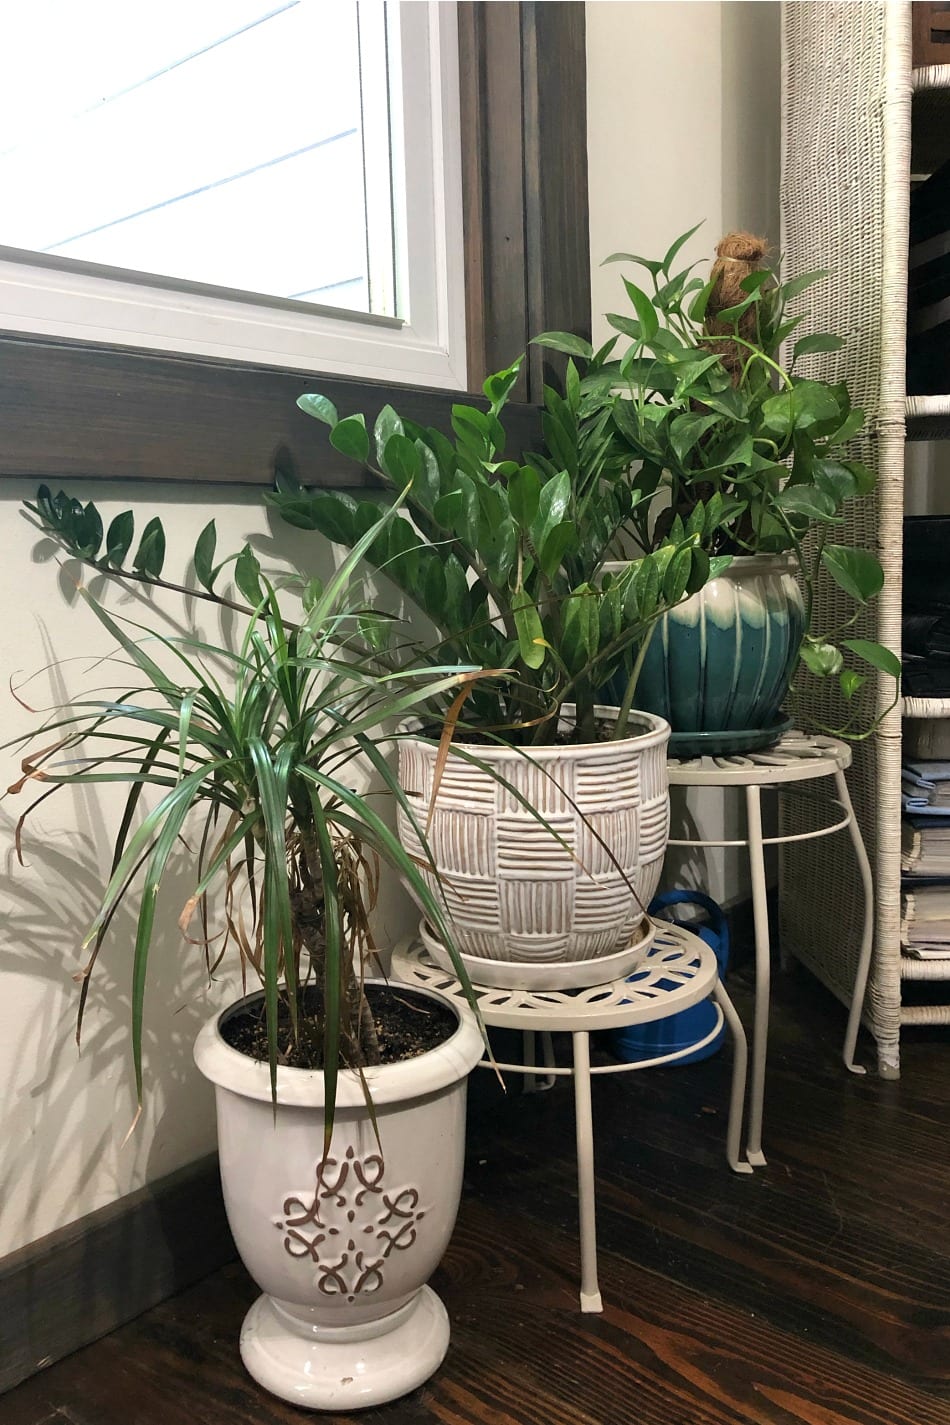 14 Air-Purifying Houseplants For Clean Air & A Beautiful Home | Growing Up Herbal | Here are 14 air-purifying houseplants that are great for indoors, easy to grow and care for (even for beginners), and make lovely additions to your home!